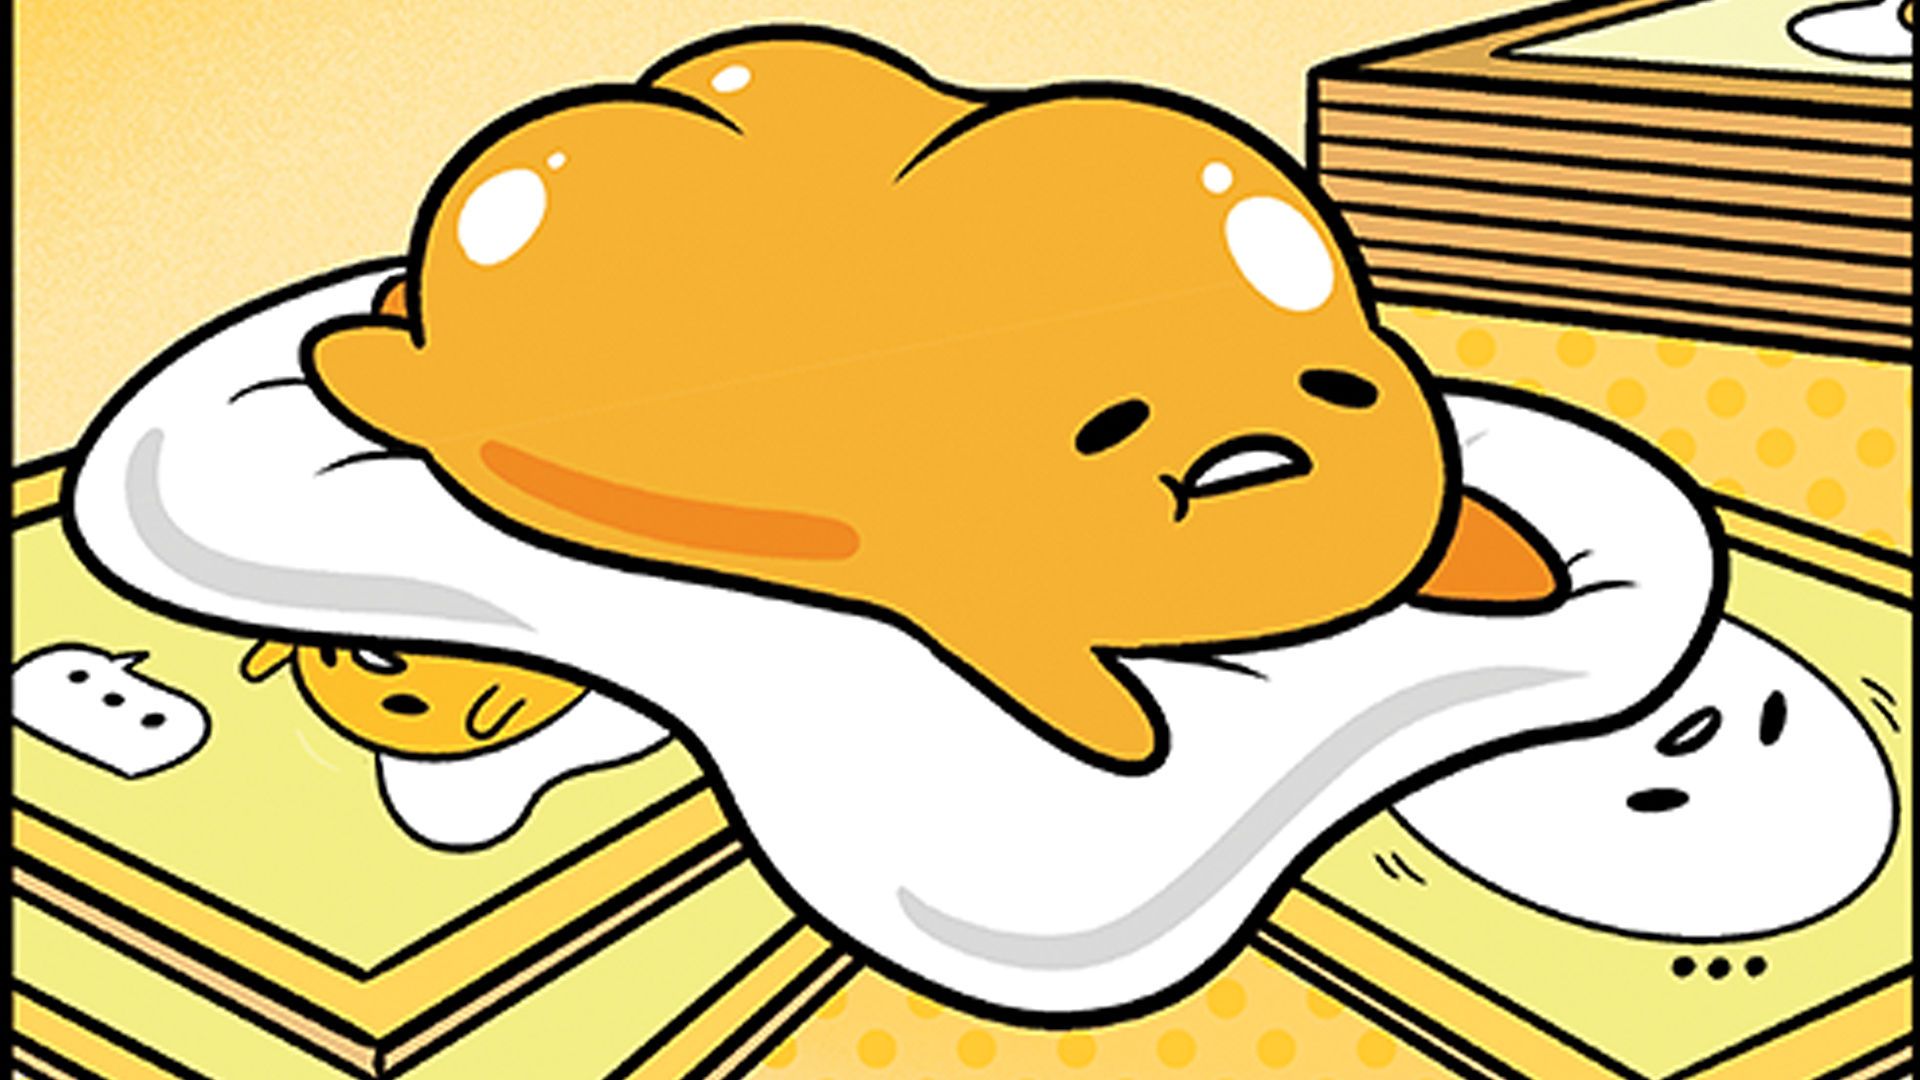 Gudetama card game, based on the lethargic Japanese cartoon, invites you to be as lazy as you like